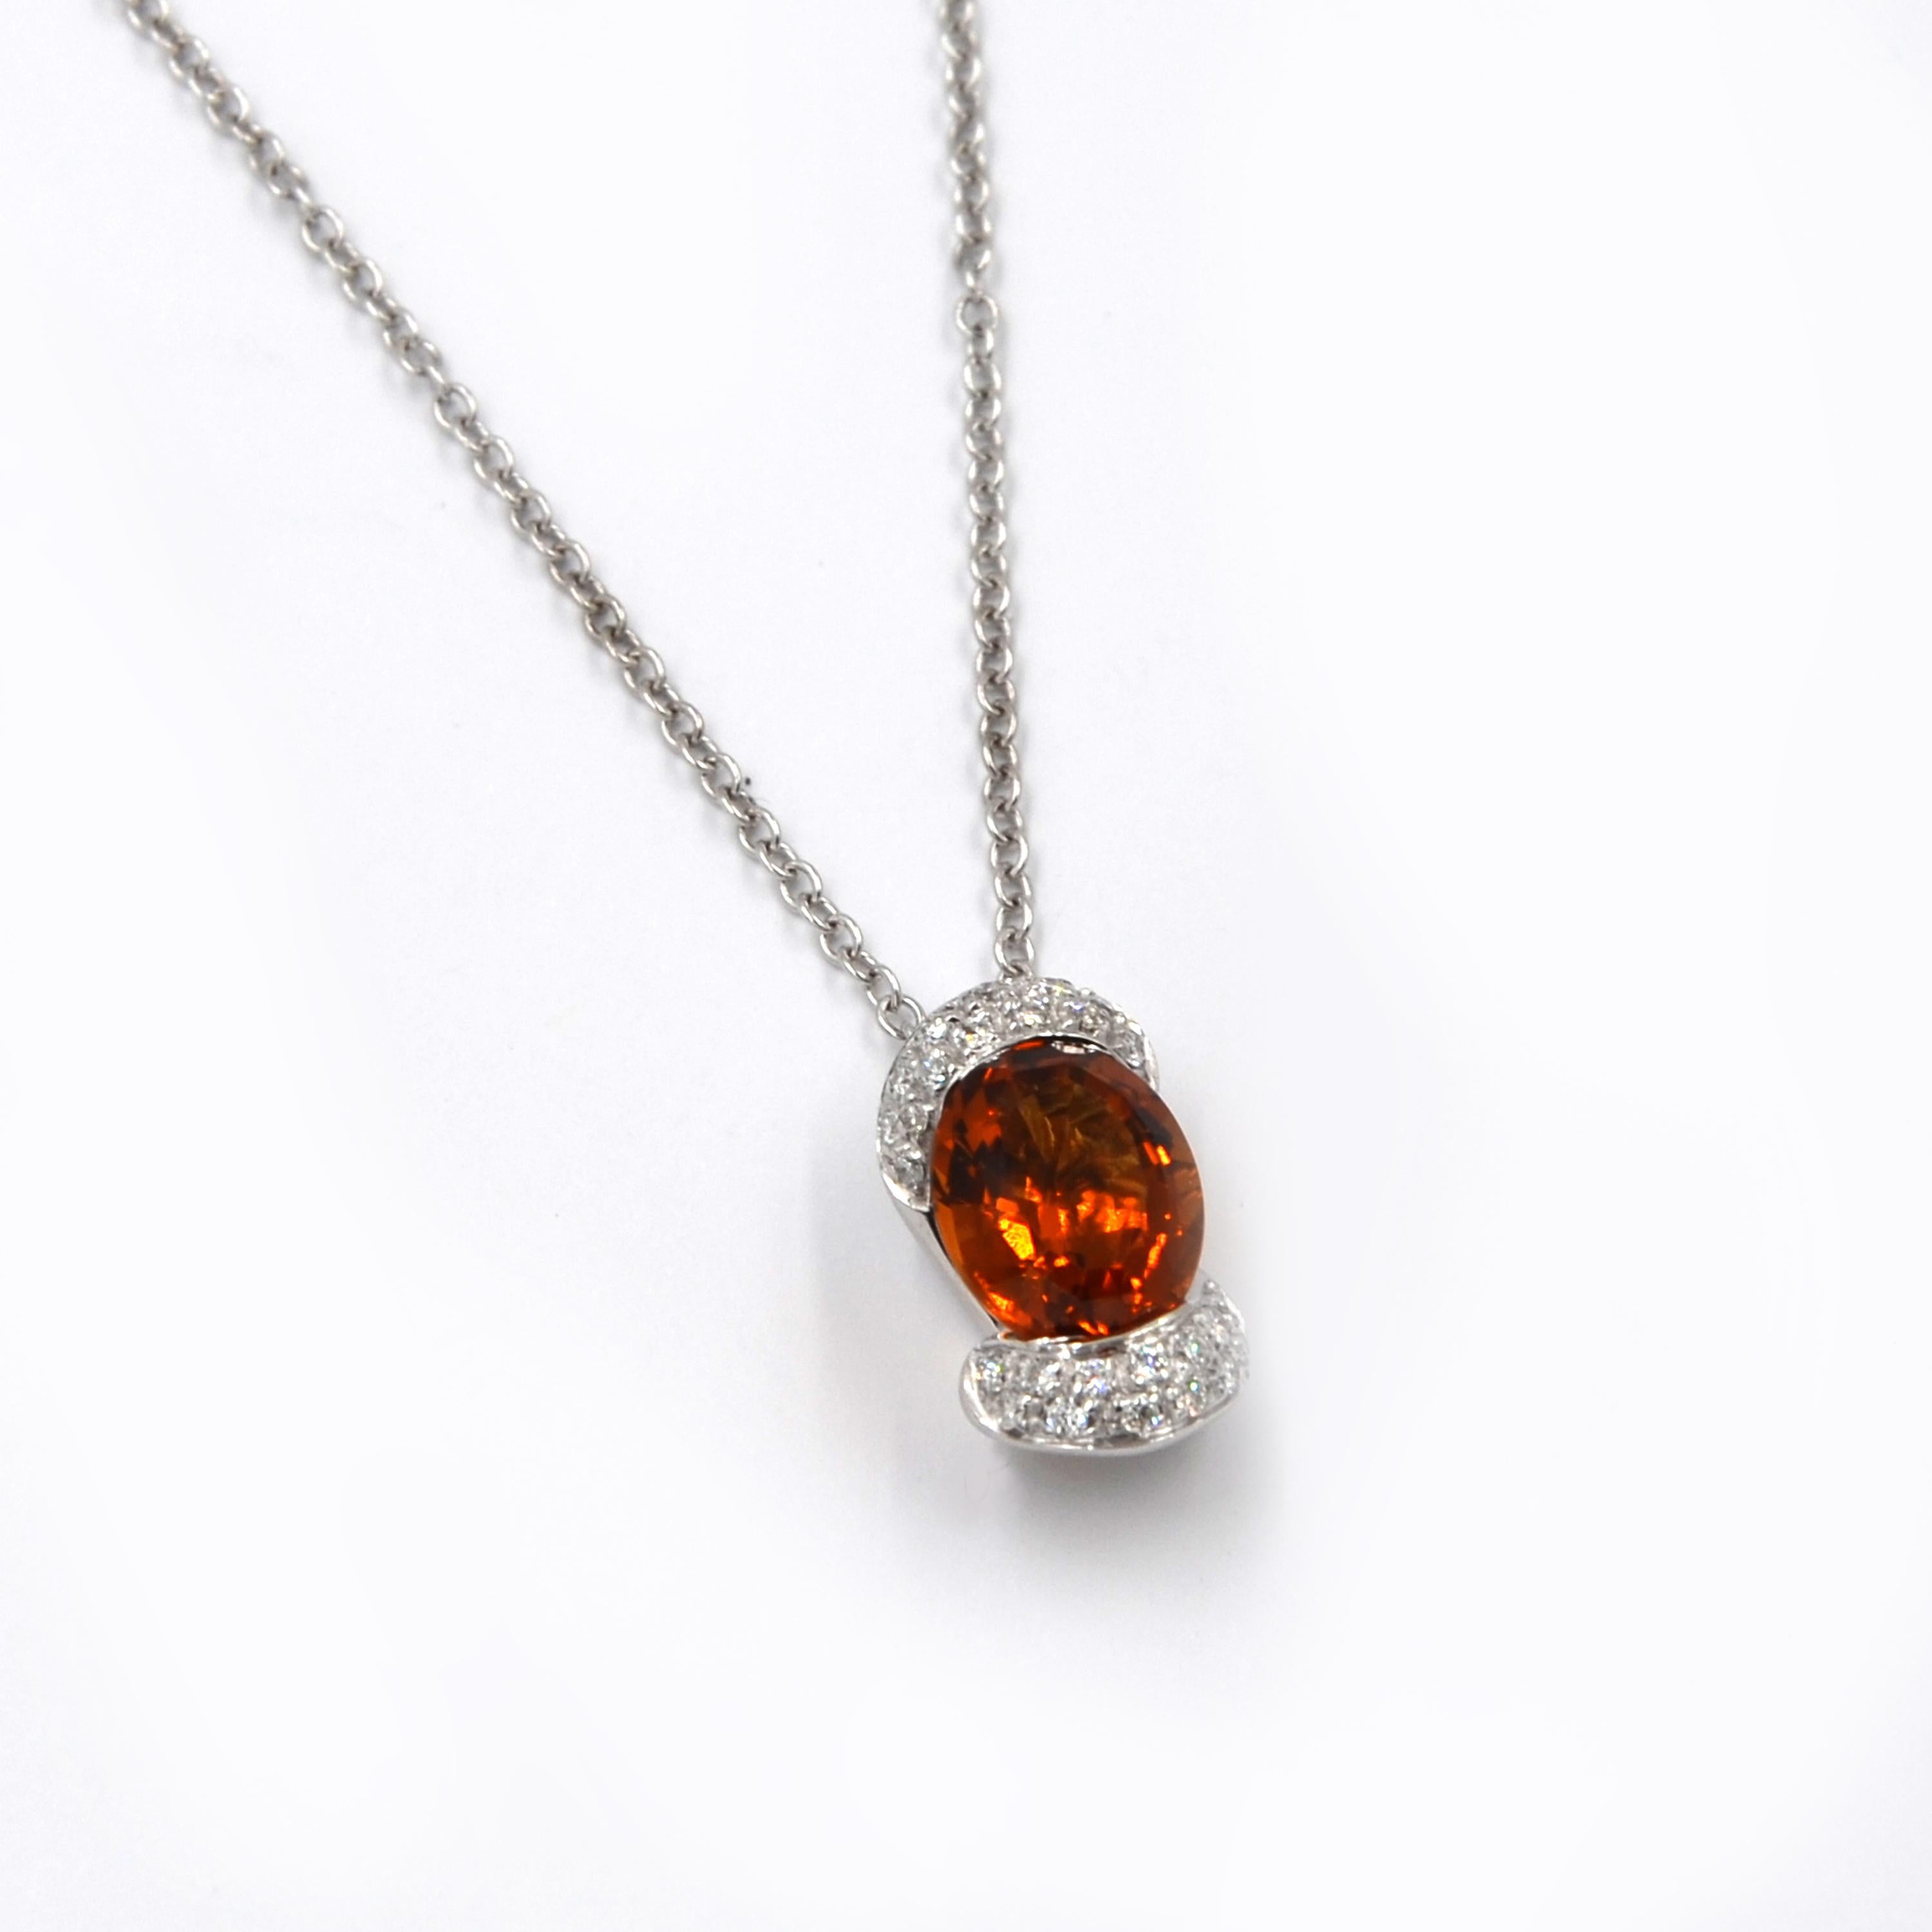 18 Karat White Gold  Garavelli Necklace featuring a natural oval madera orange surronded on top ad bottom by white diamonds.
Chain lenght cm 45 with adjustment at cm 40
Made In Italy. 
18KT GOLD gr : 6,70
WHITE DIAMONDS ct : 0,21
Natural oval